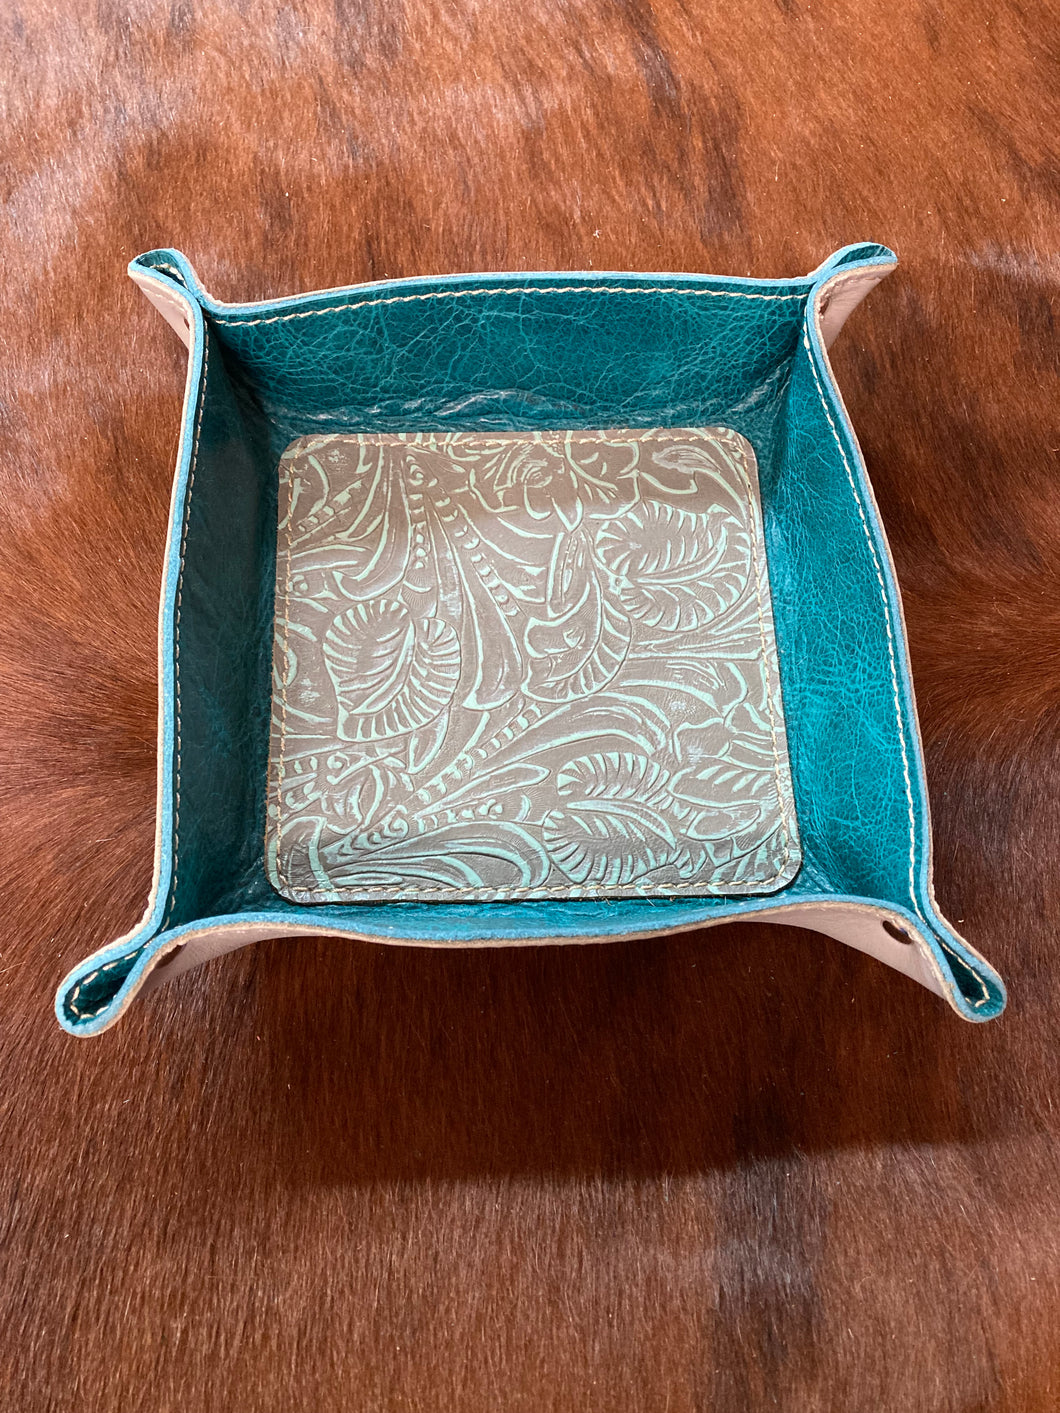 Valet Tray - Turquoise Floral Embossed